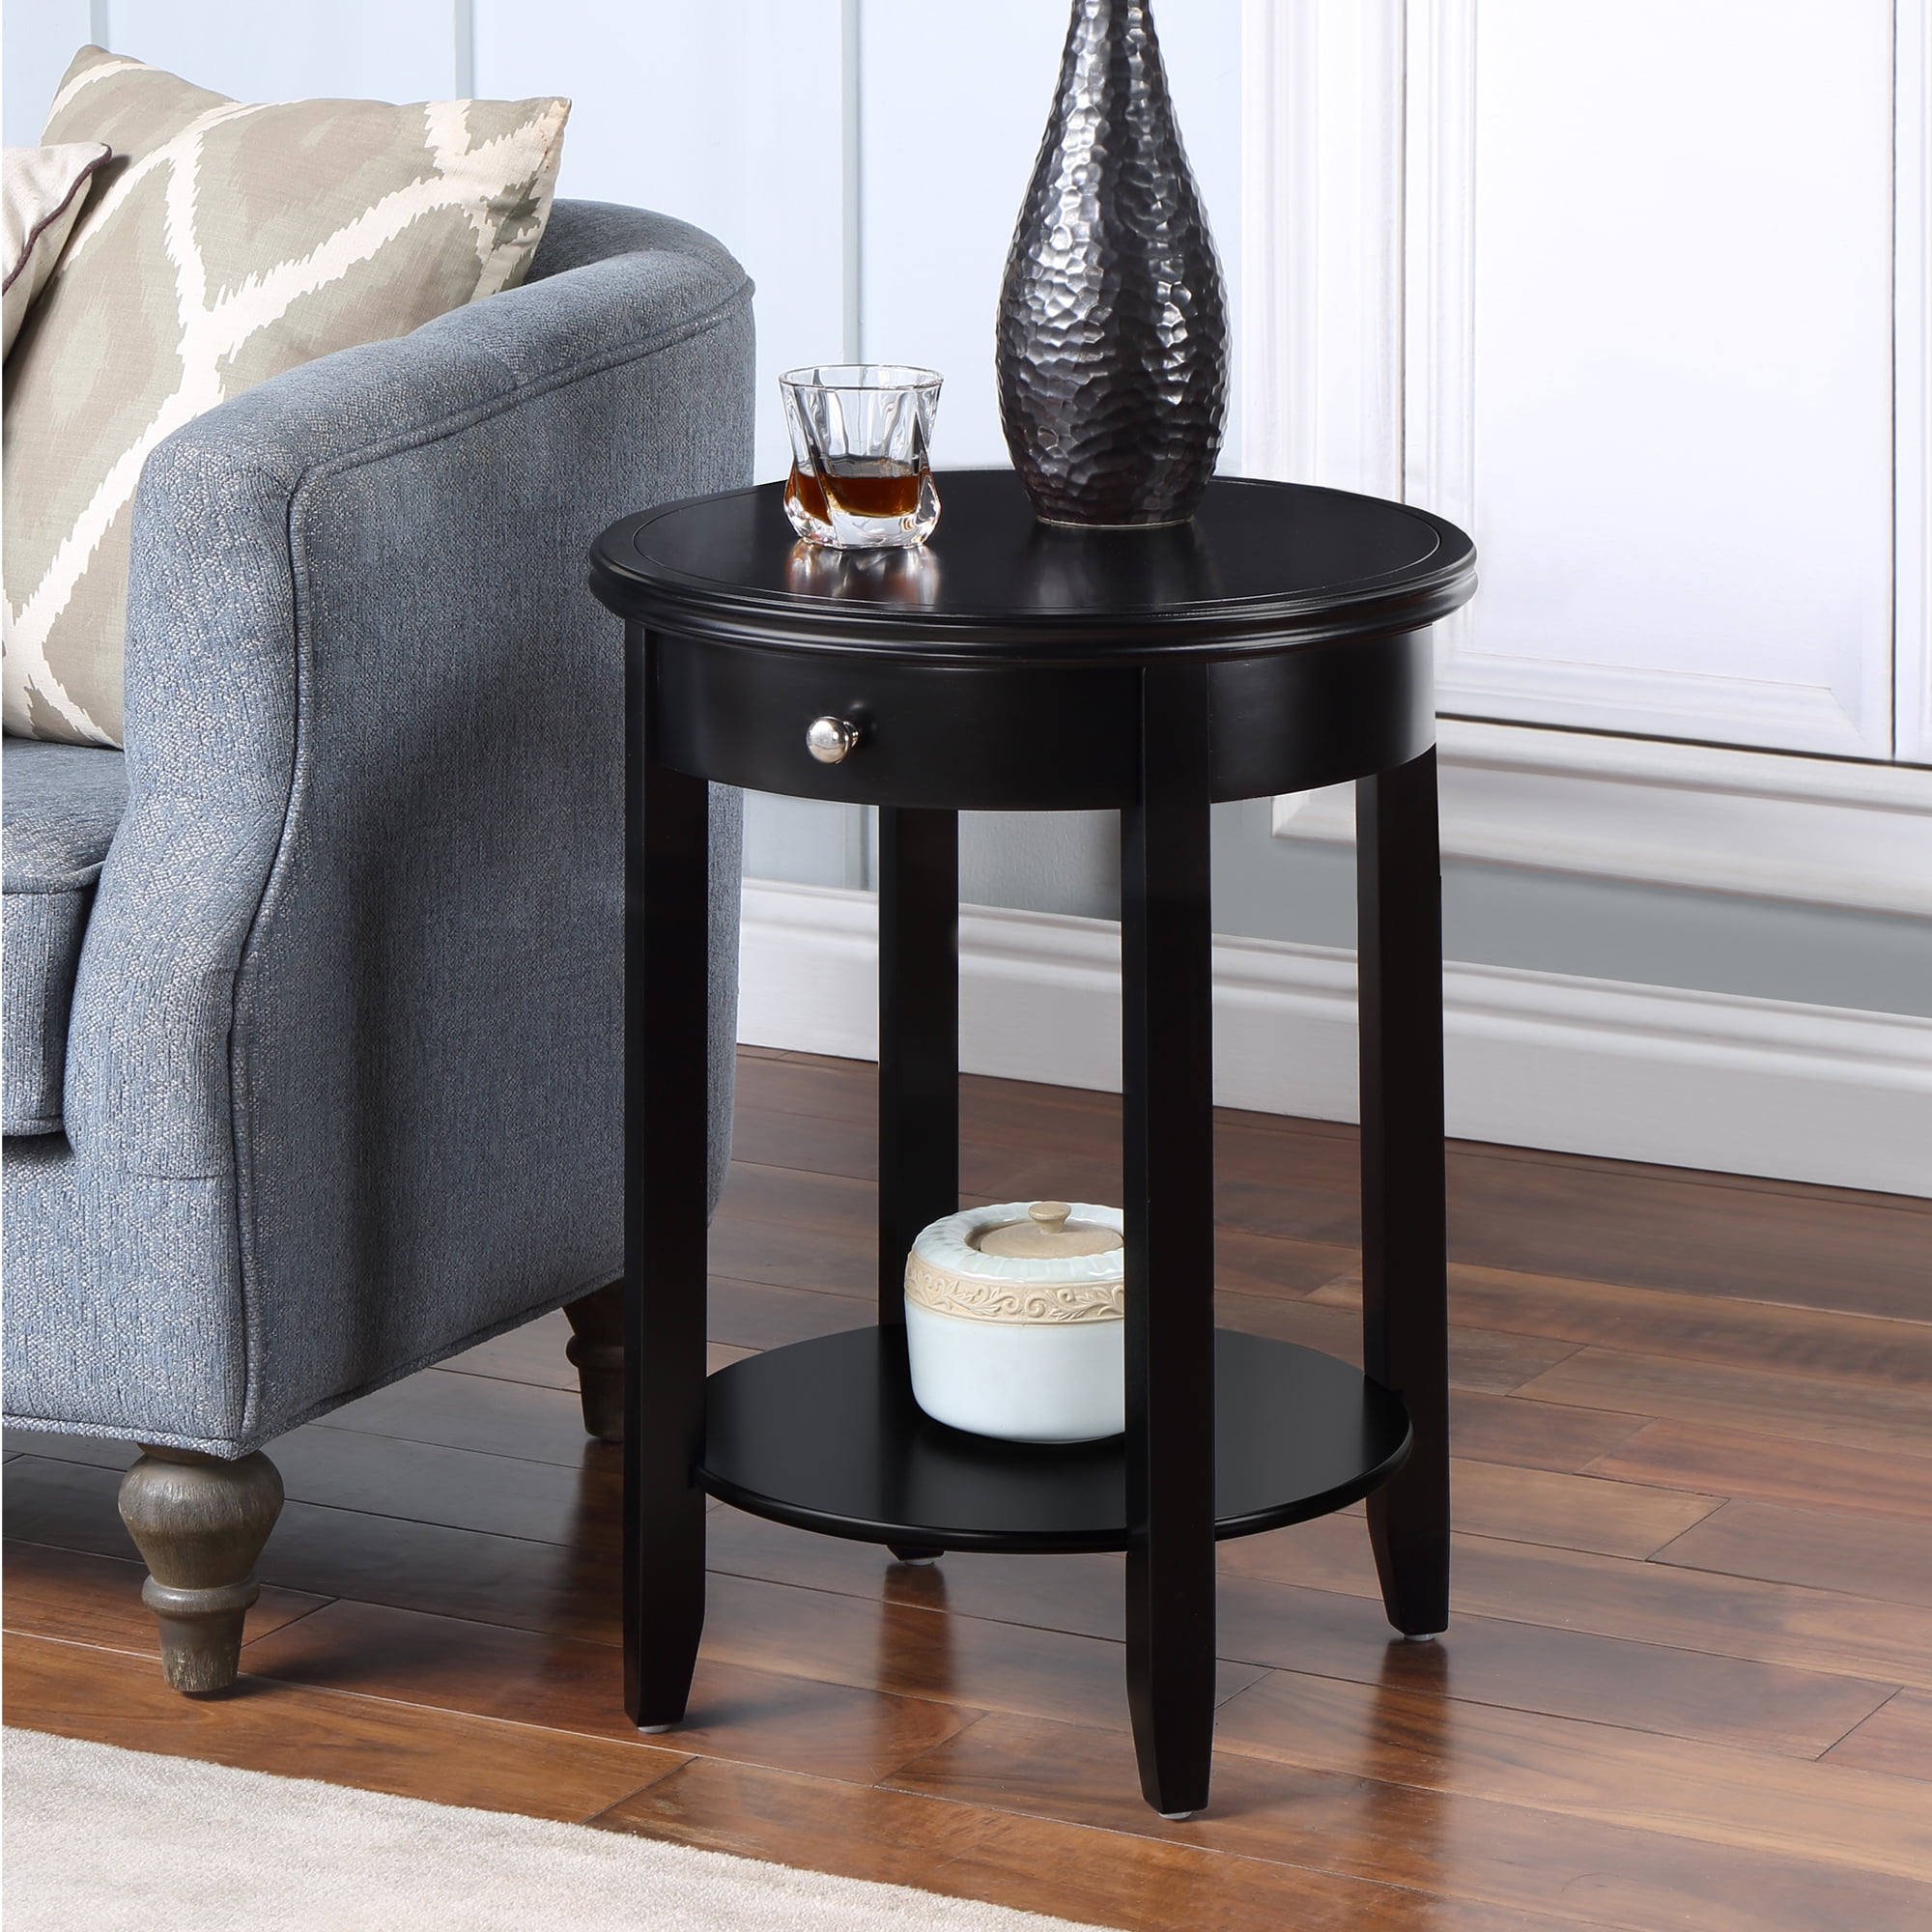 American Heritage Baldwin 1 Drawer End Table with Shelf, Black -  Convenience Concepts, HI2824259